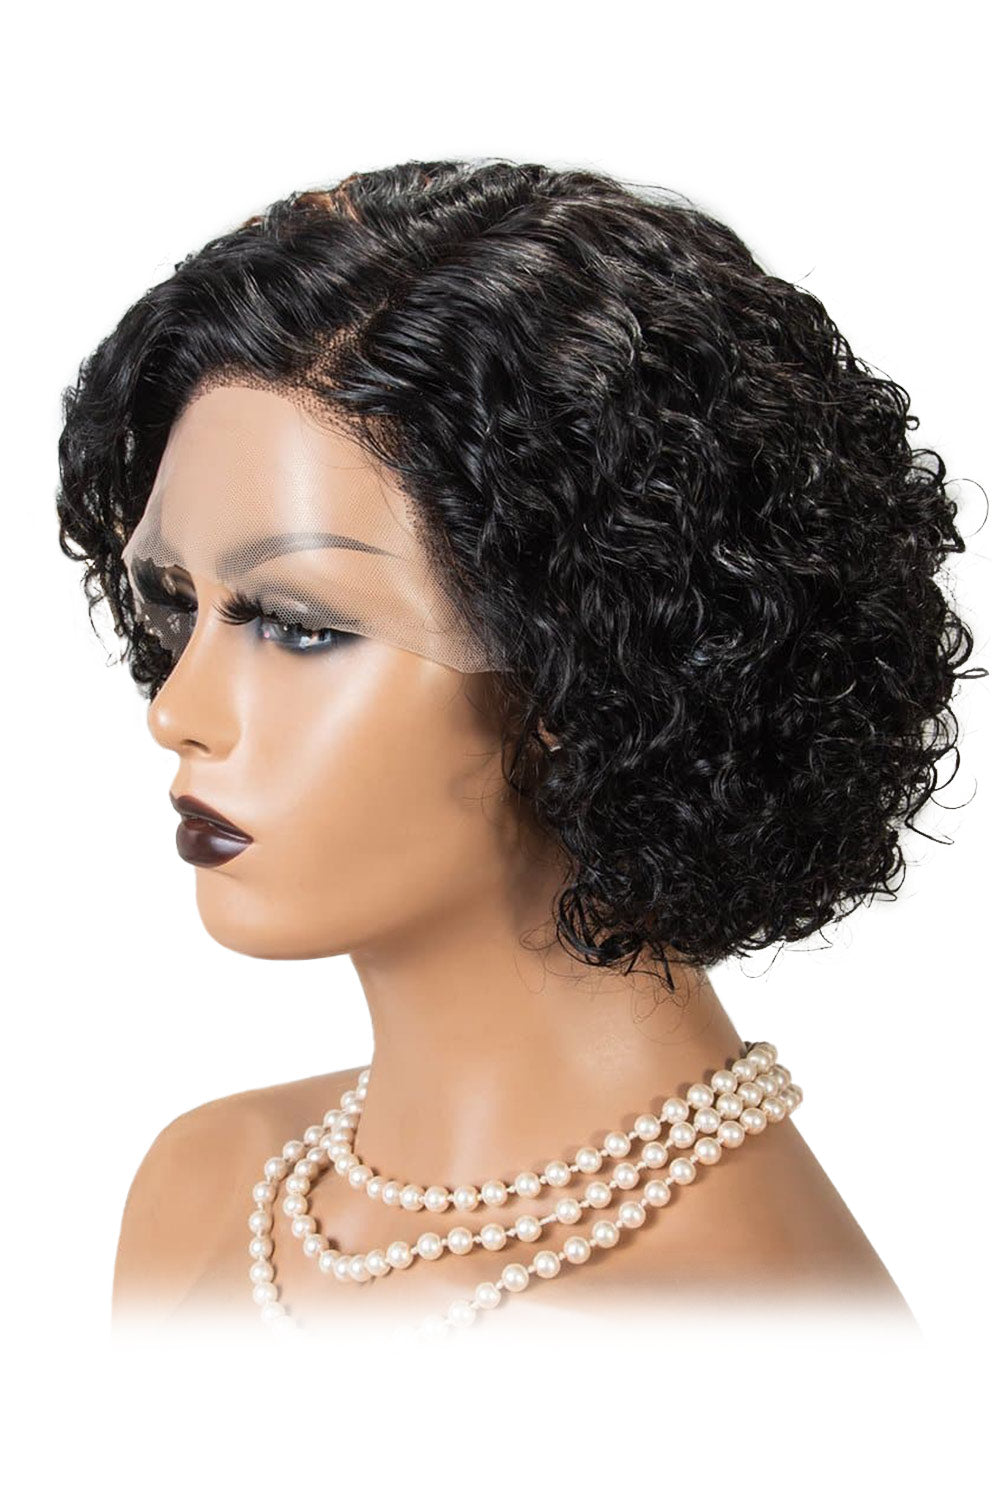 T Part Lace Wig Highlight Curly Bob-PB38